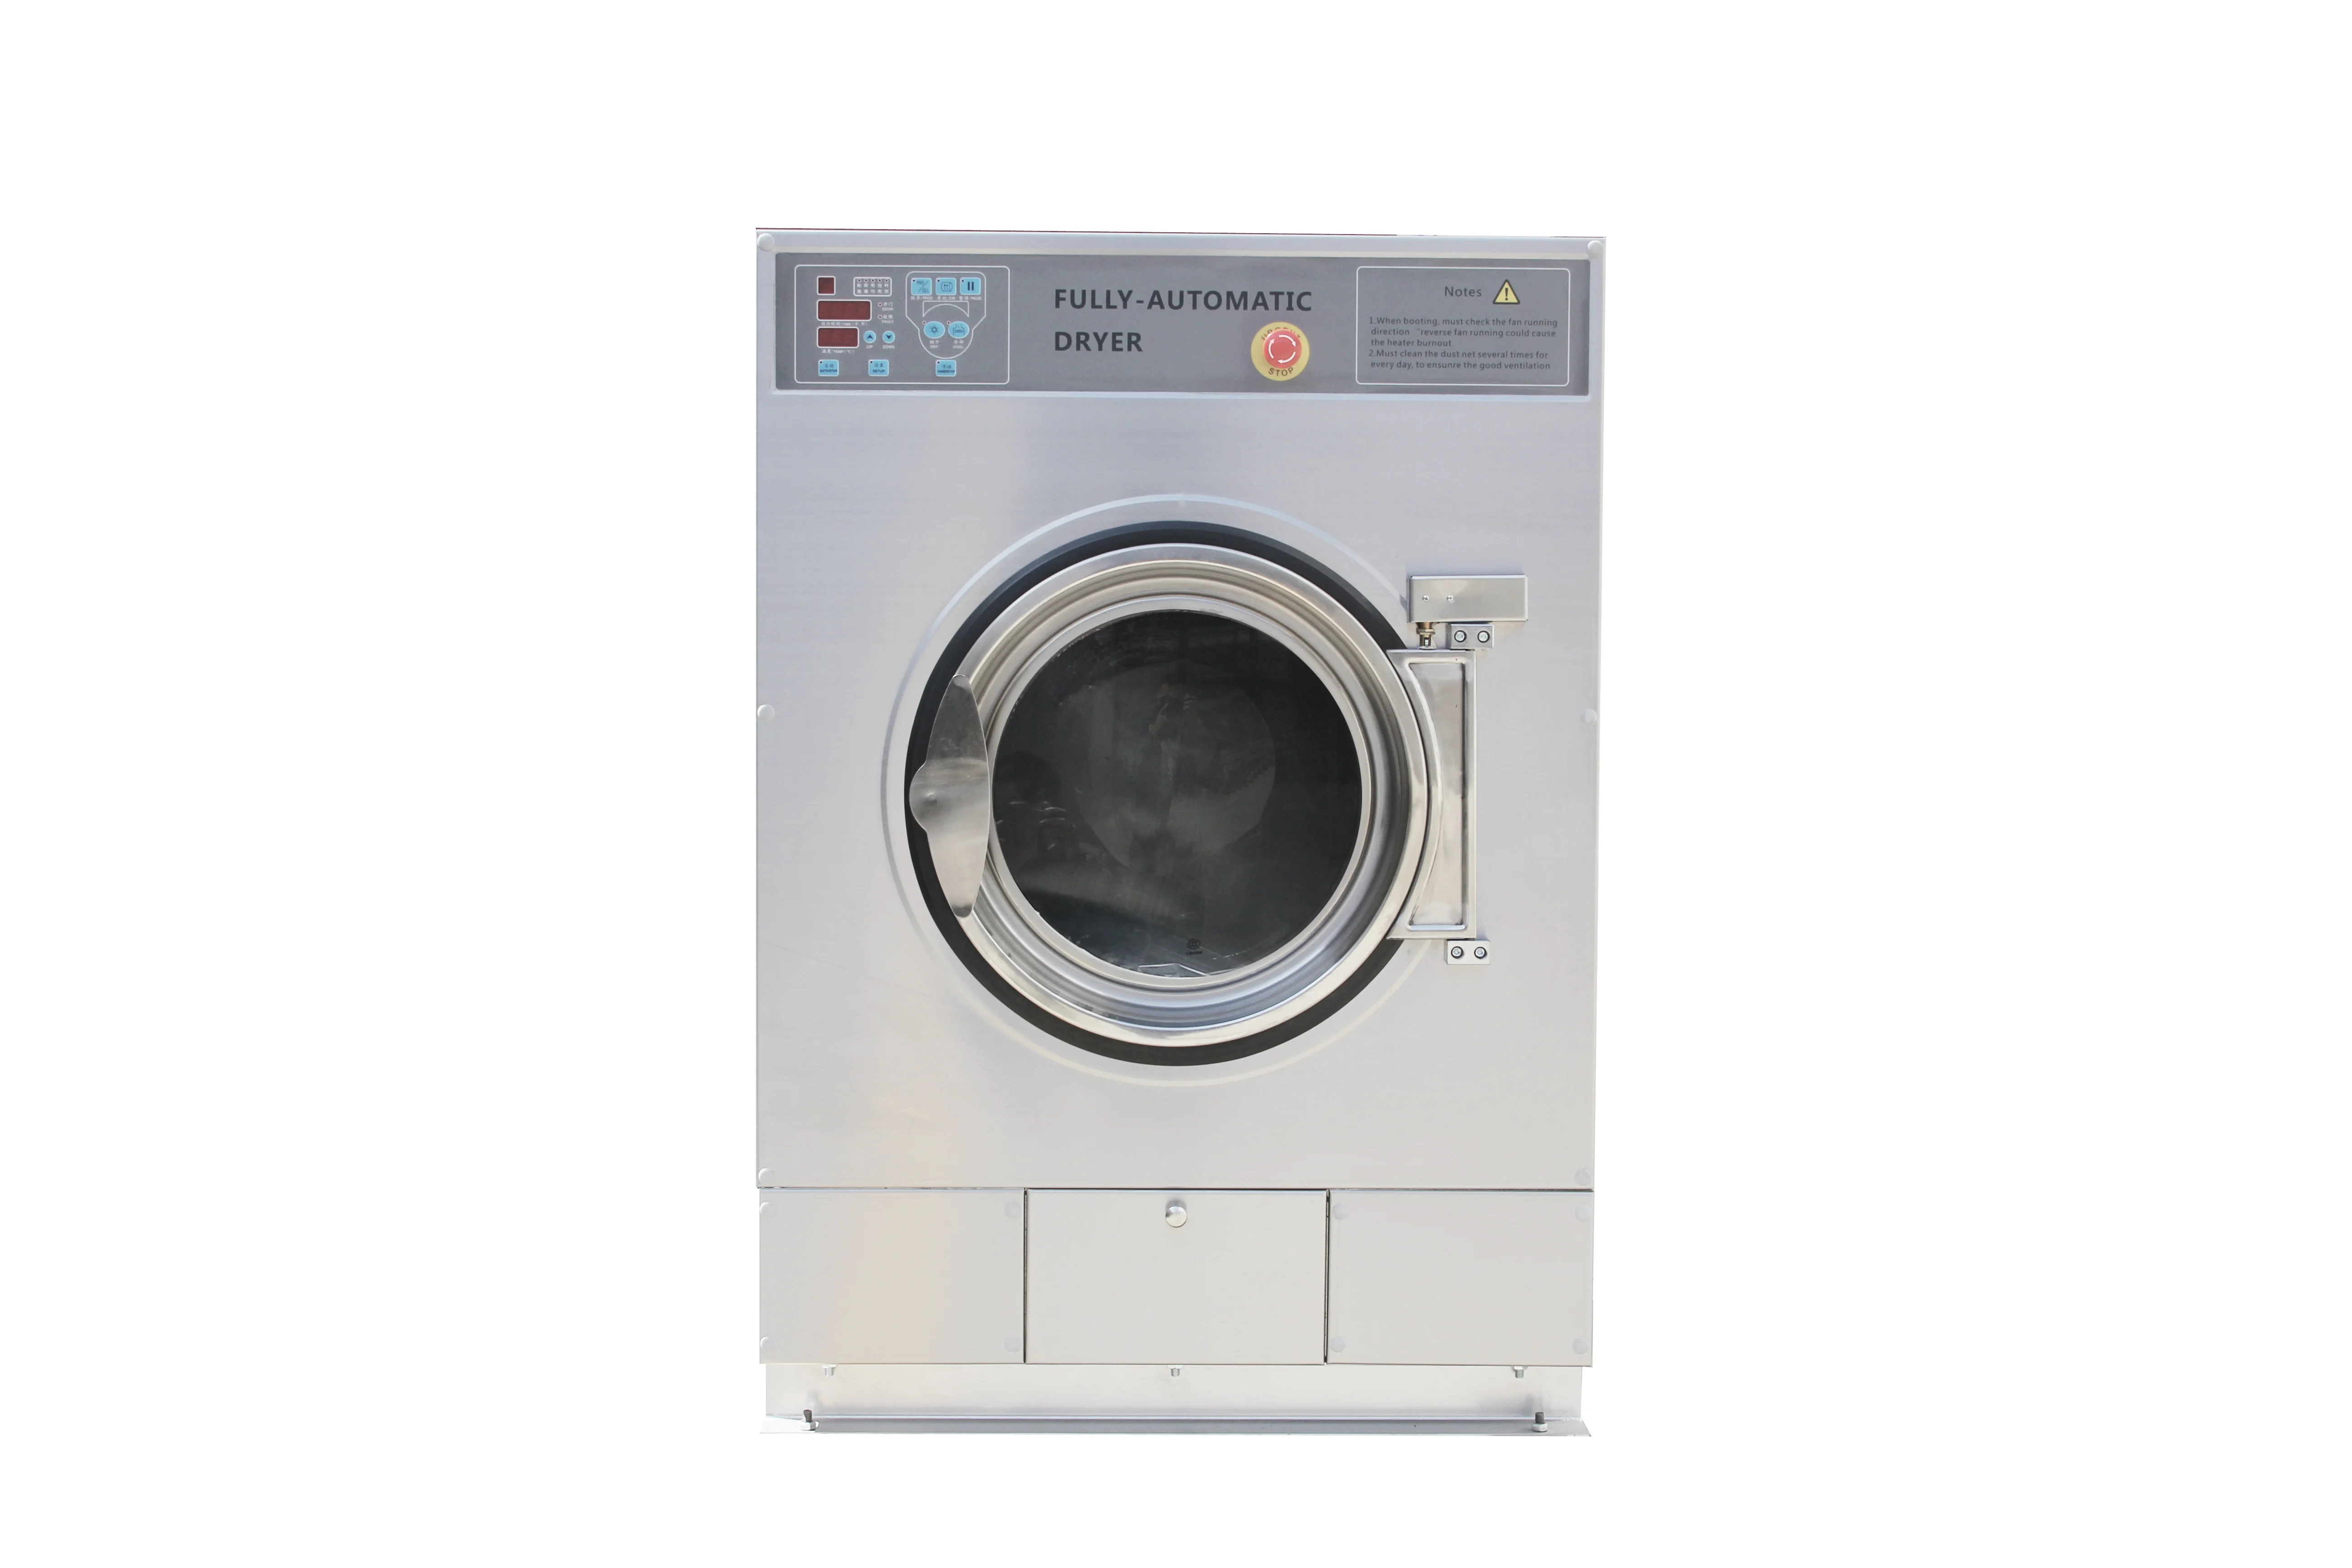 Commercial industrial washer and dryer prices